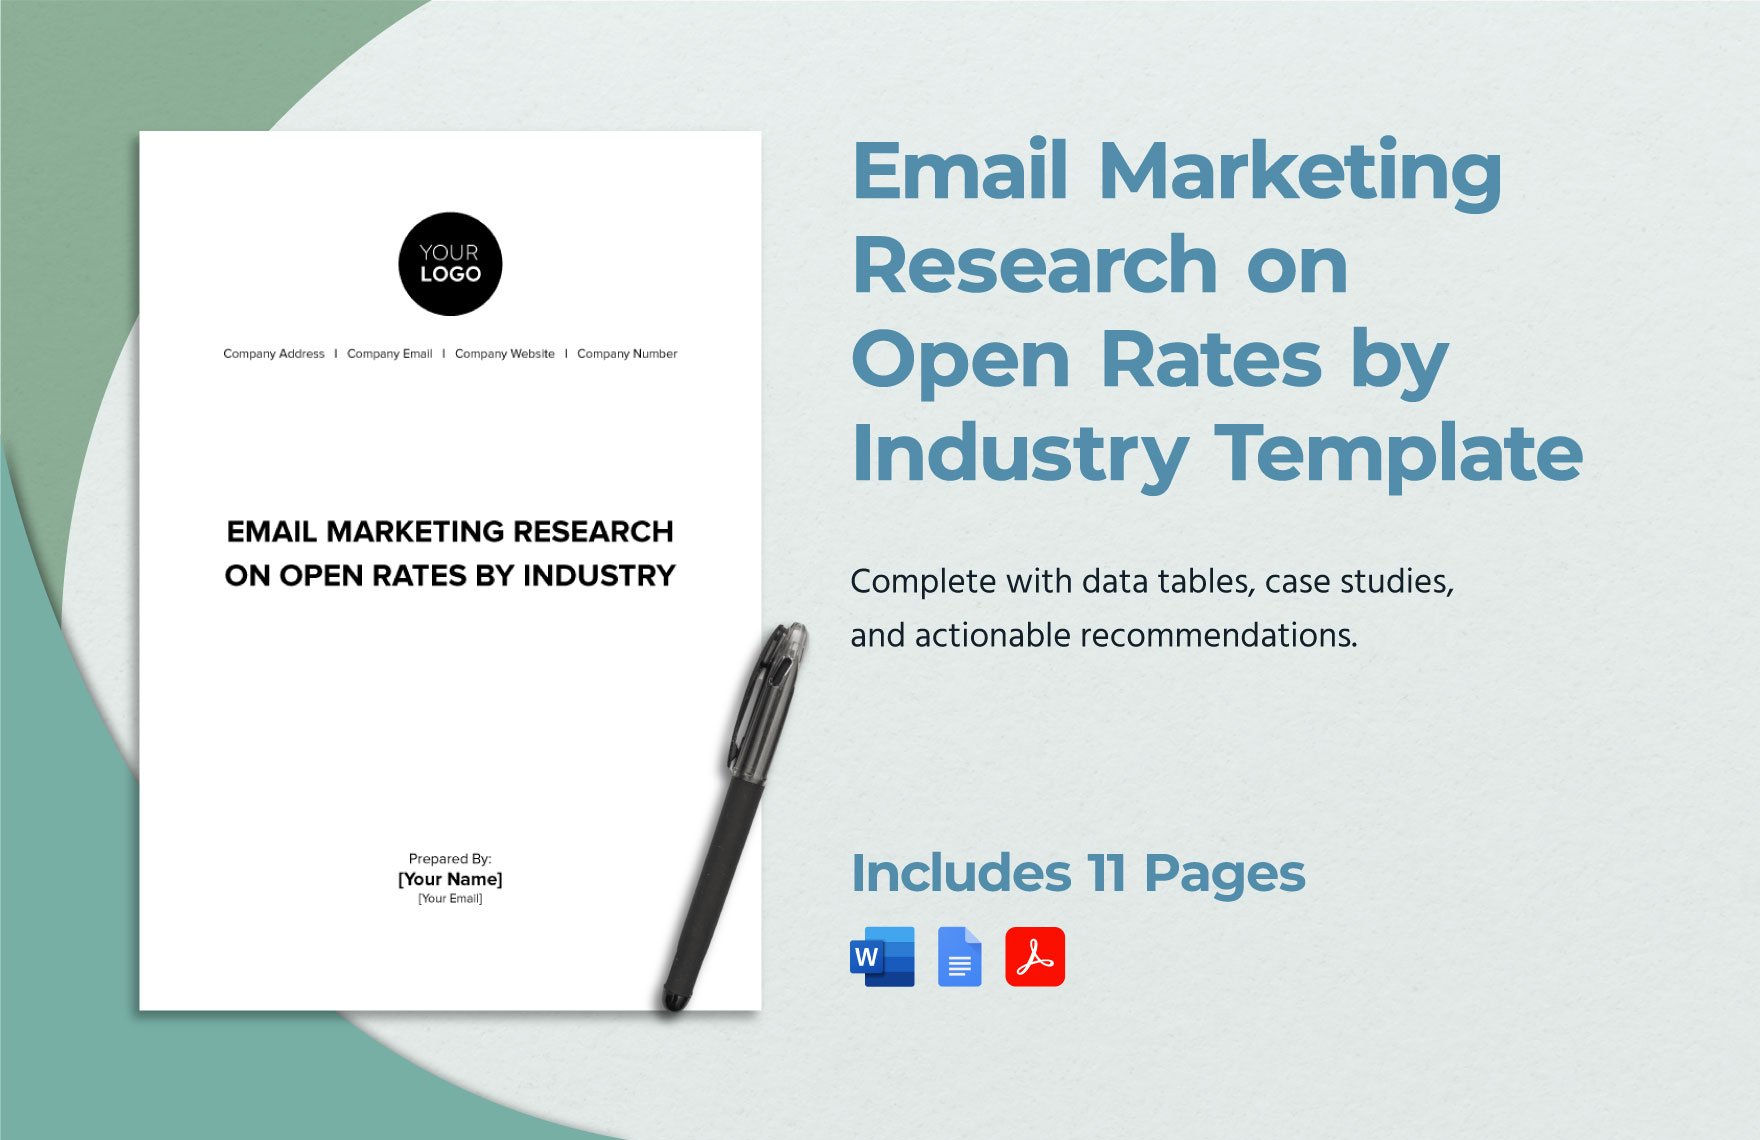 Email Marketing Research on Open Rates by Industry Template